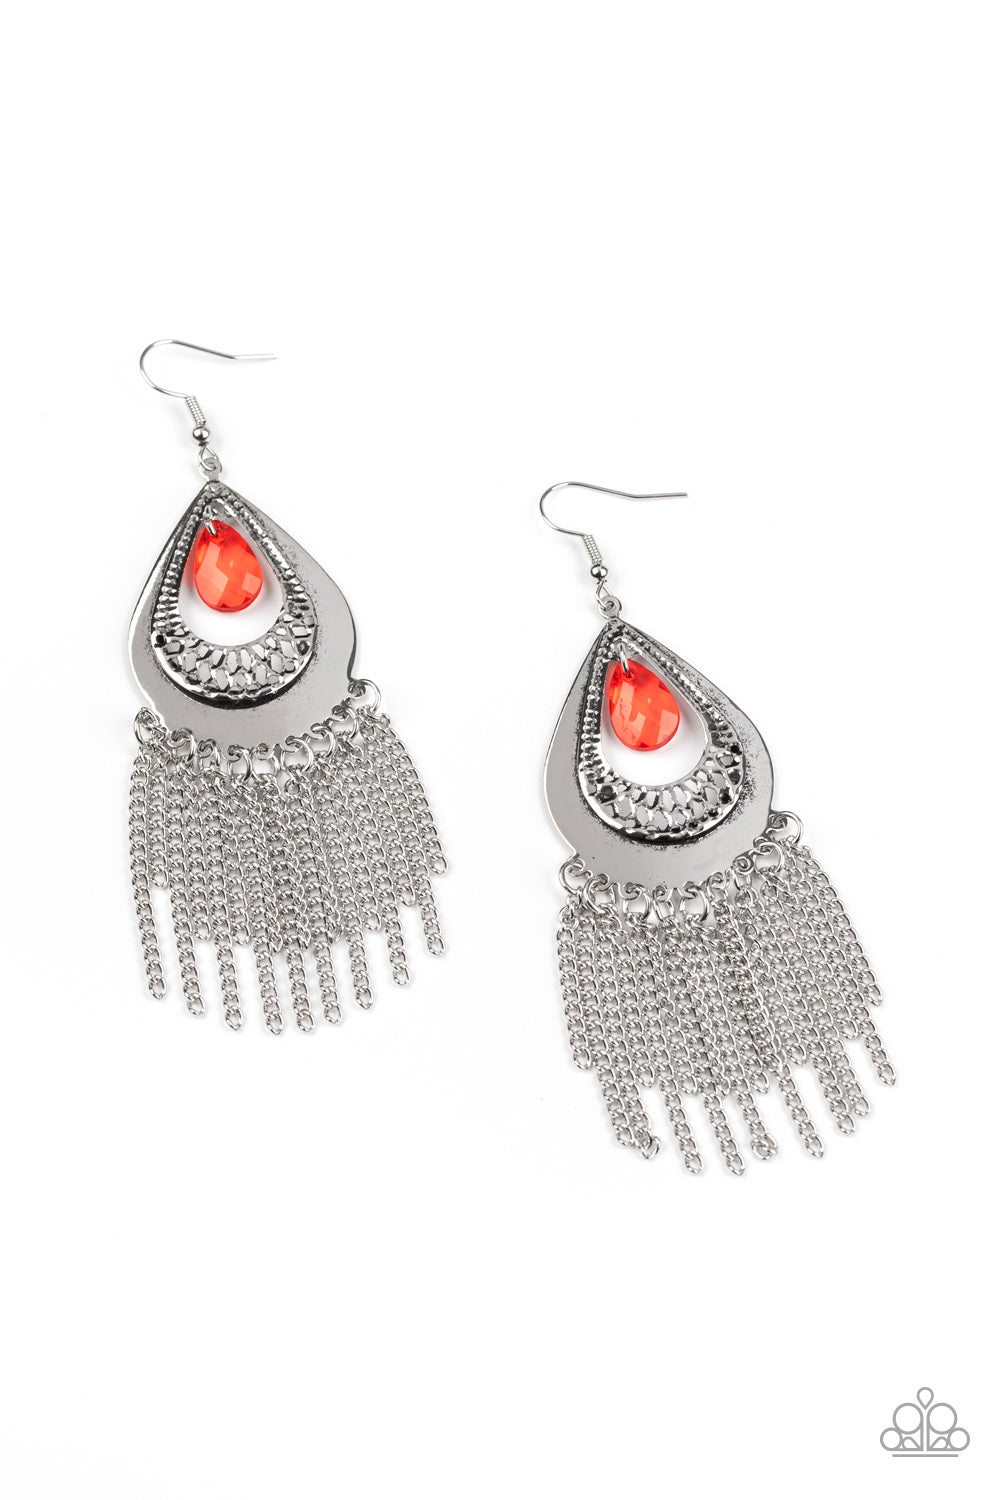 Scattered Storms - Red Earrings - Princess Glam Shop